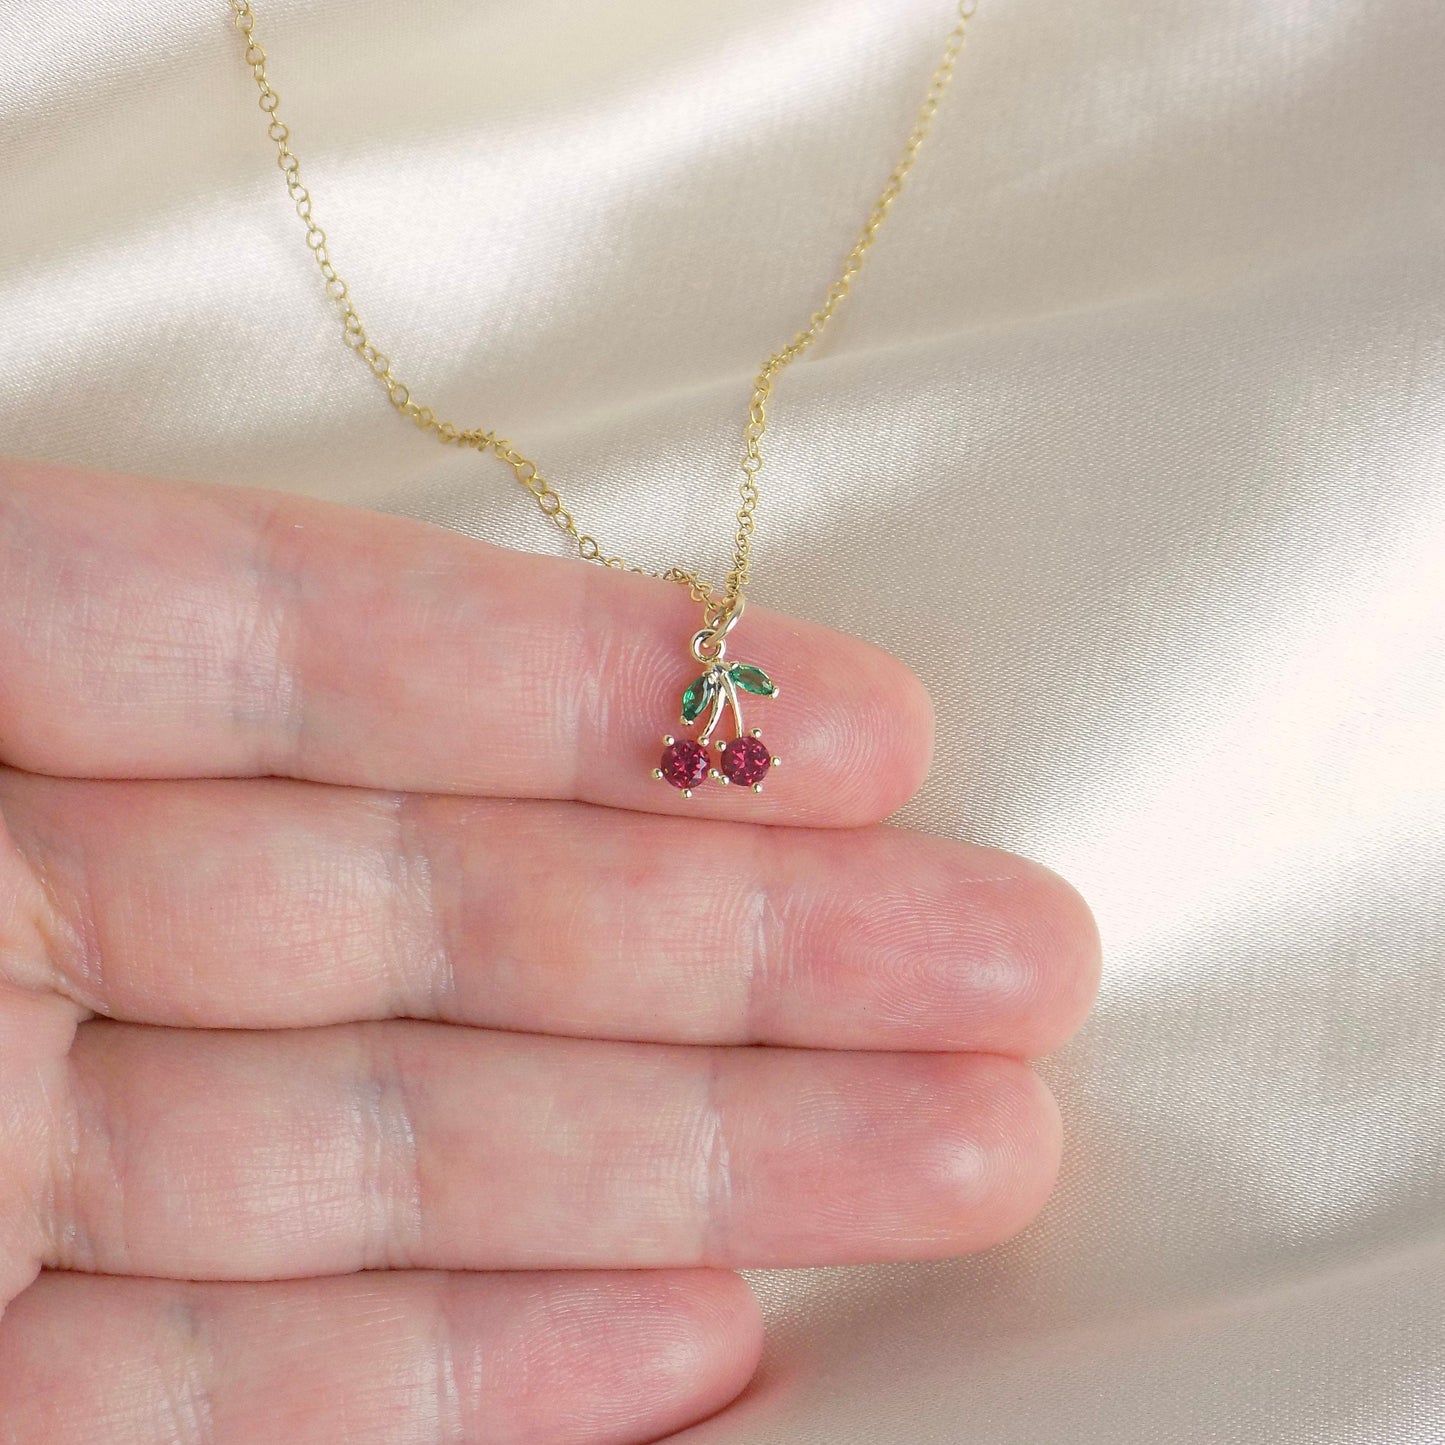 Tiny Cherry Necklace Gold, Small Zircon Red Cherry Charm Necklace, Dainty Gold Layer, 14K Gold Filled Chain, Gifts For Her, M6-32